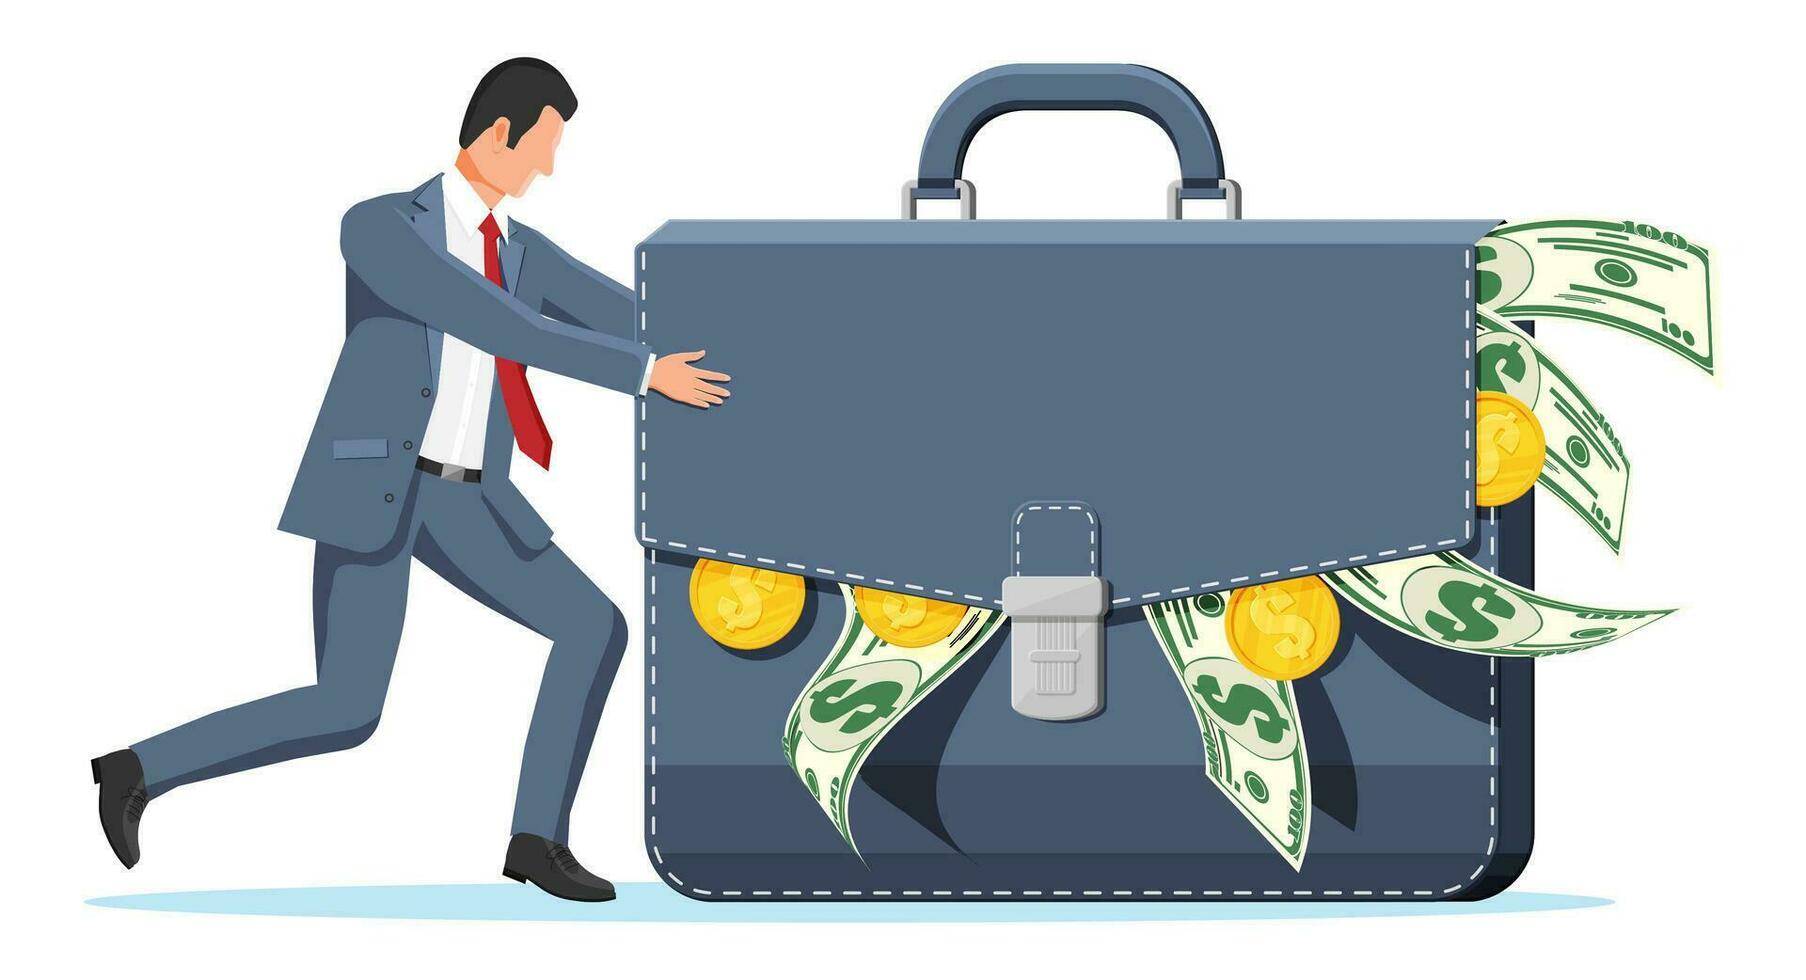 Businessman pushes huge briefcase with money. Business man pushing big suitcase full of cash. Dollar banknotes and gold coins in case. Theft or bribery concept. Vector illustration in flat style.